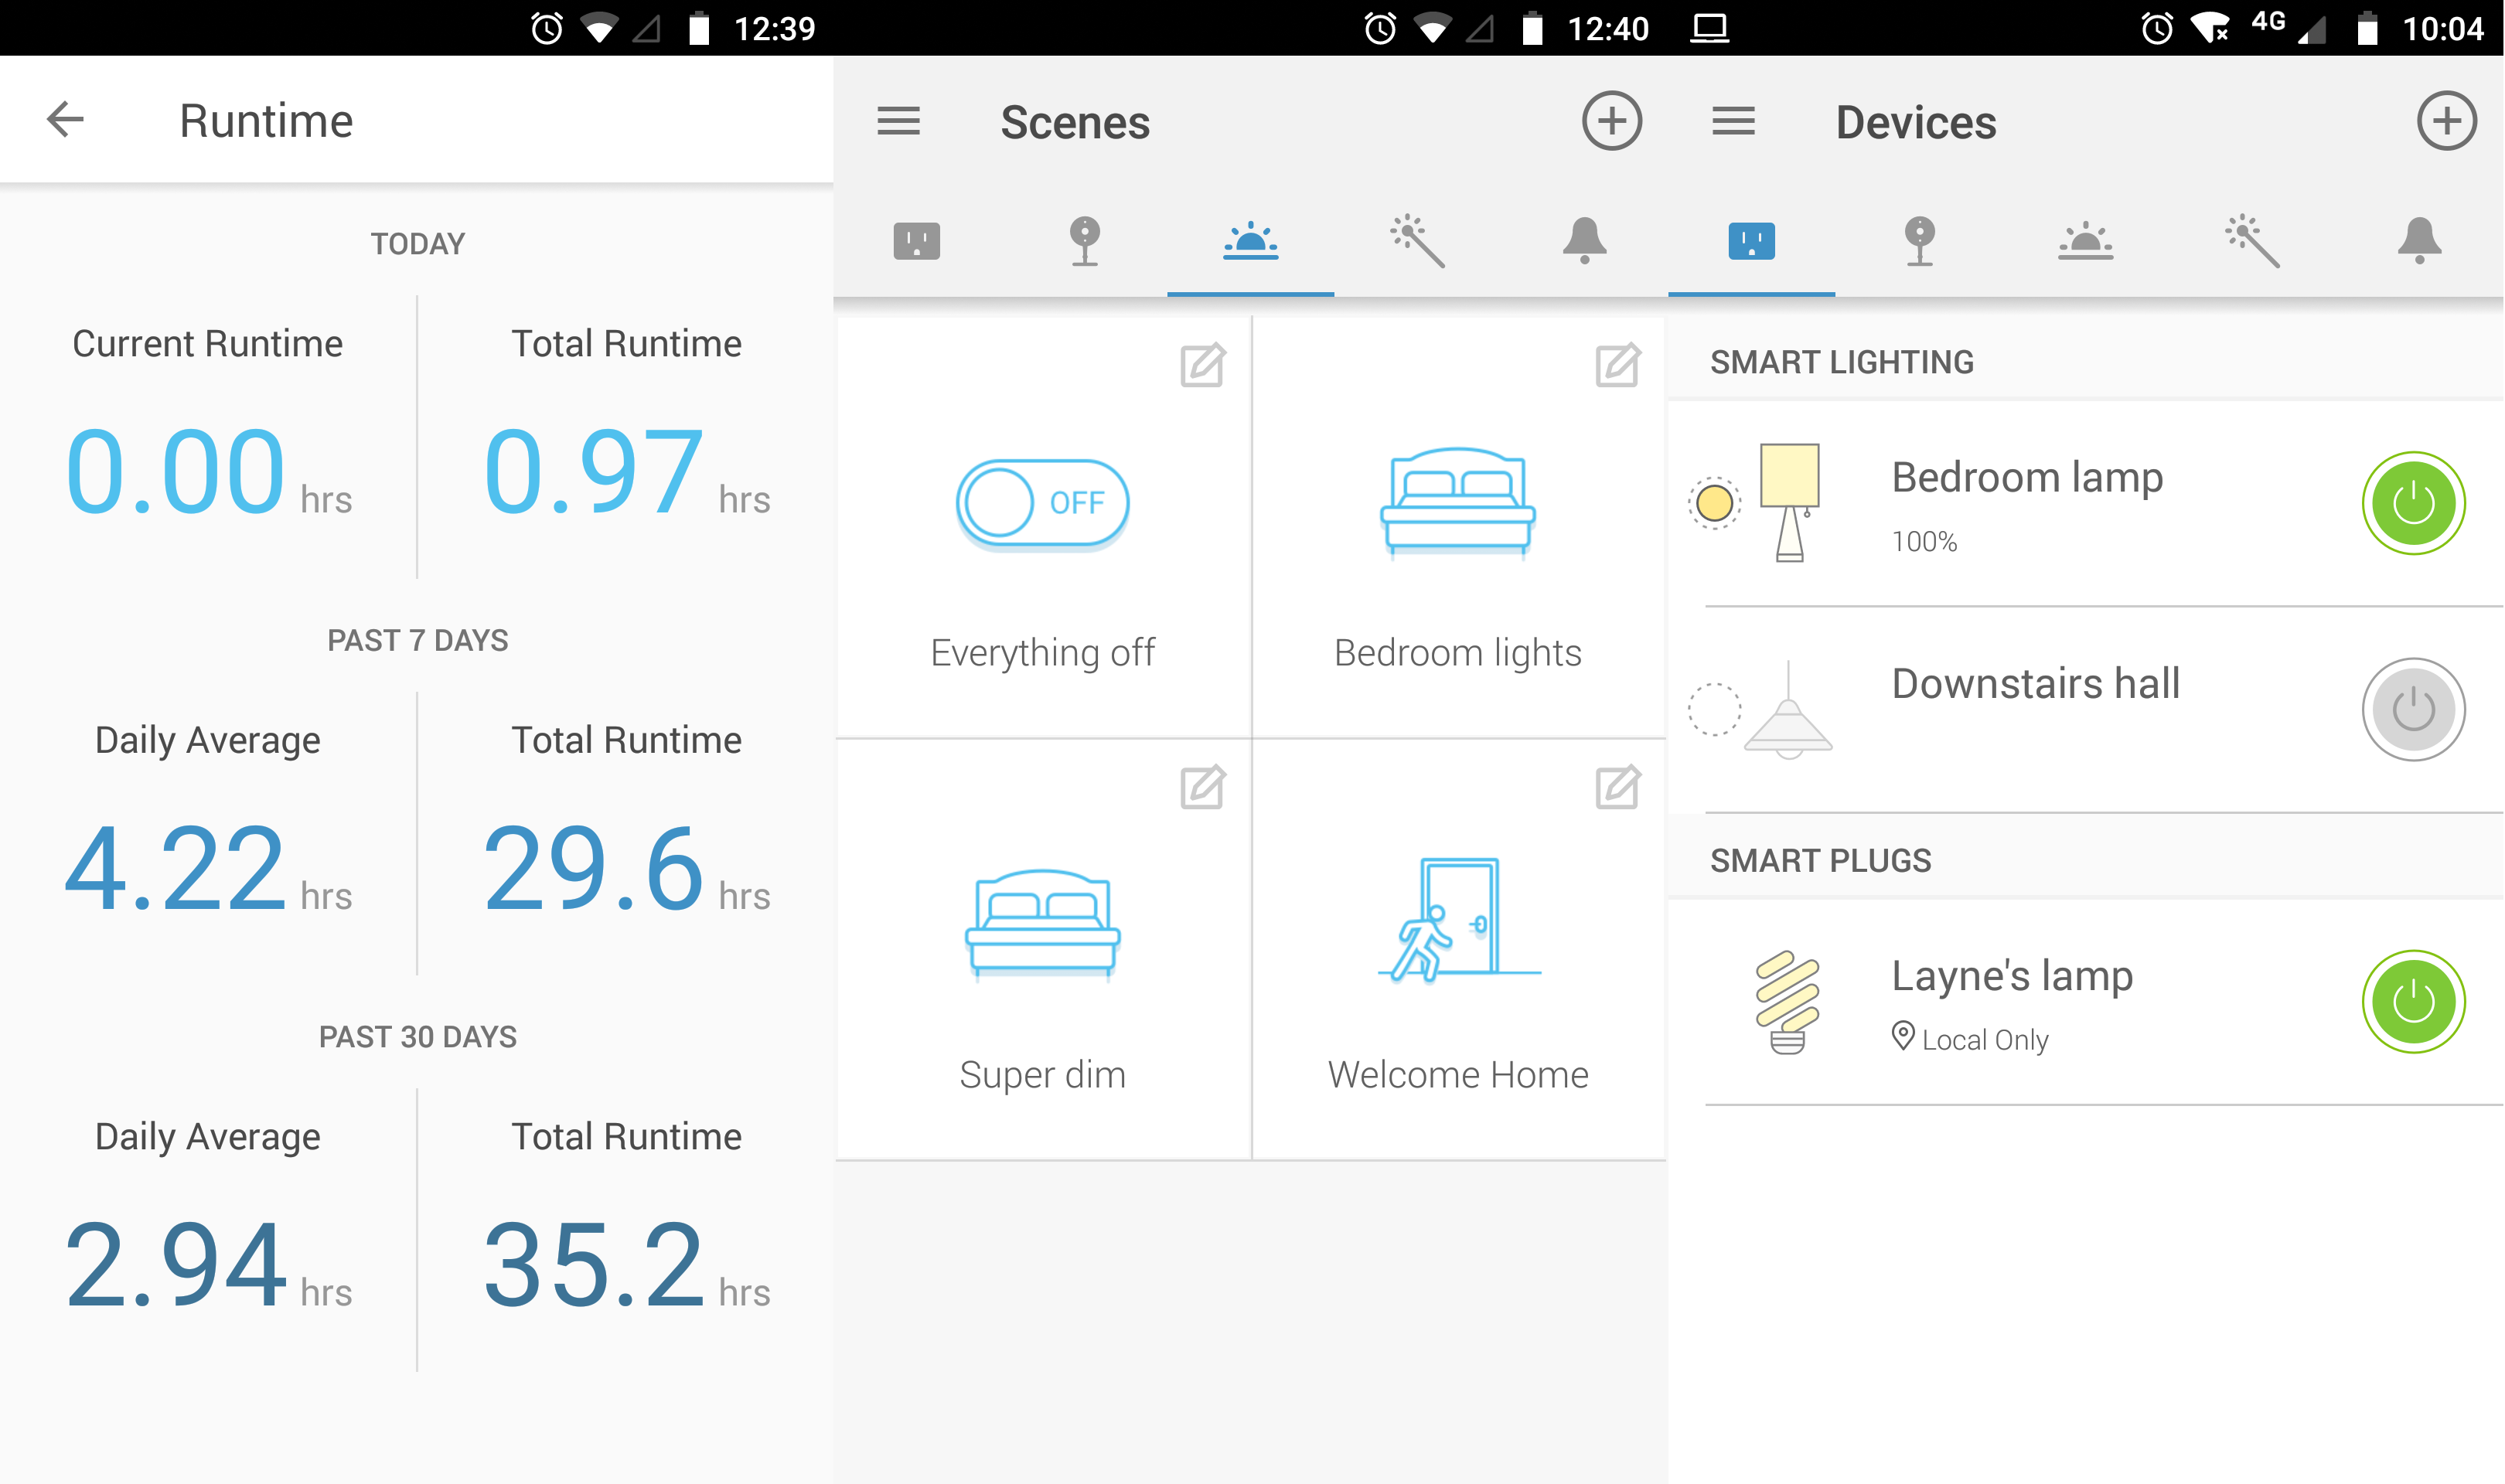 TP-Link Kasa app screenshots showing runtime info and scenes